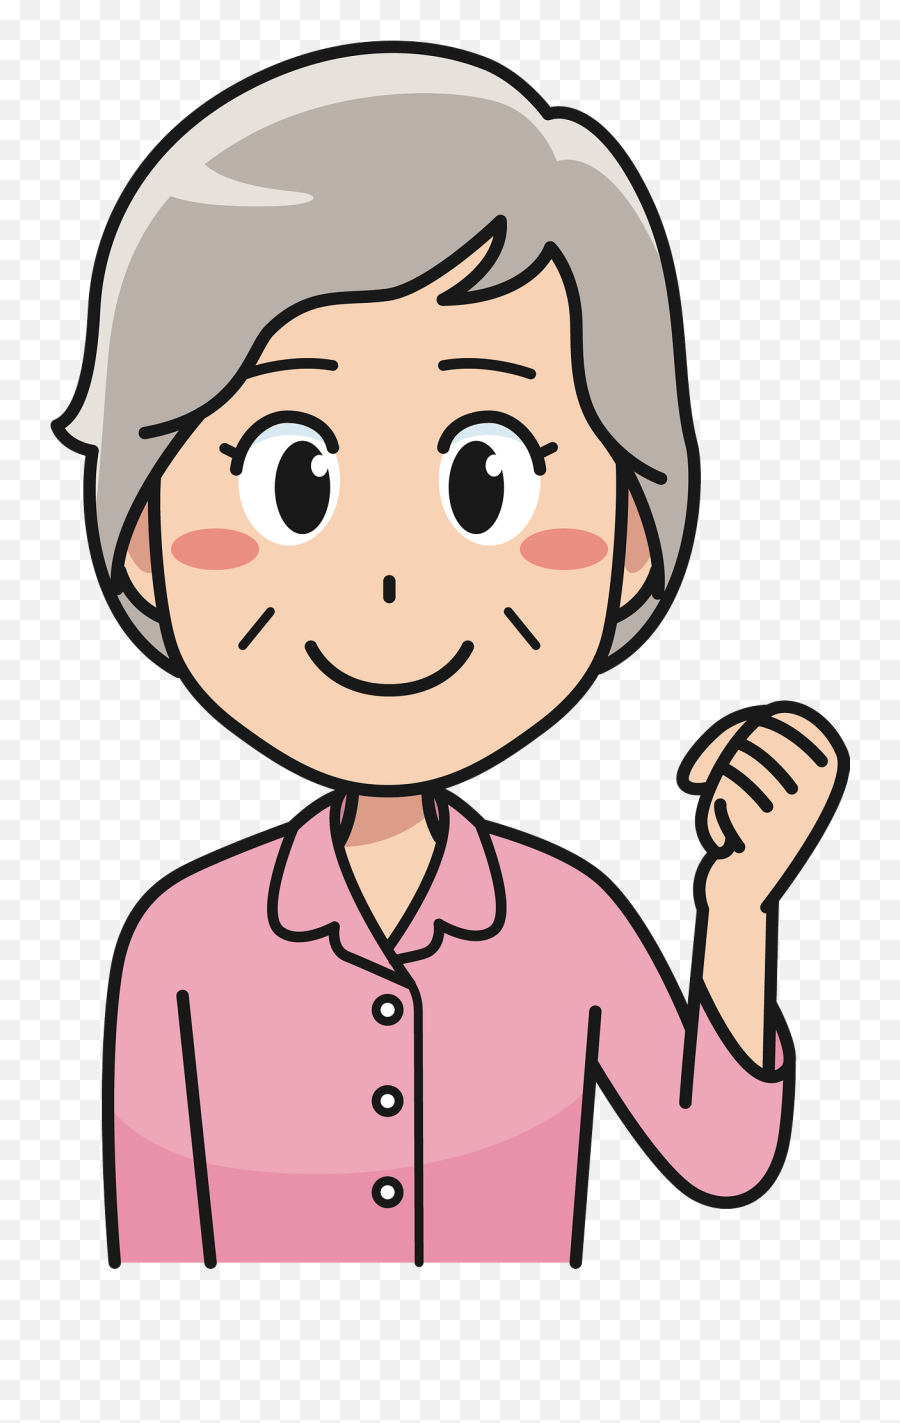 Elderly Lady Clipart - Elderly Lady Clipart Emoji,Lady Clipart